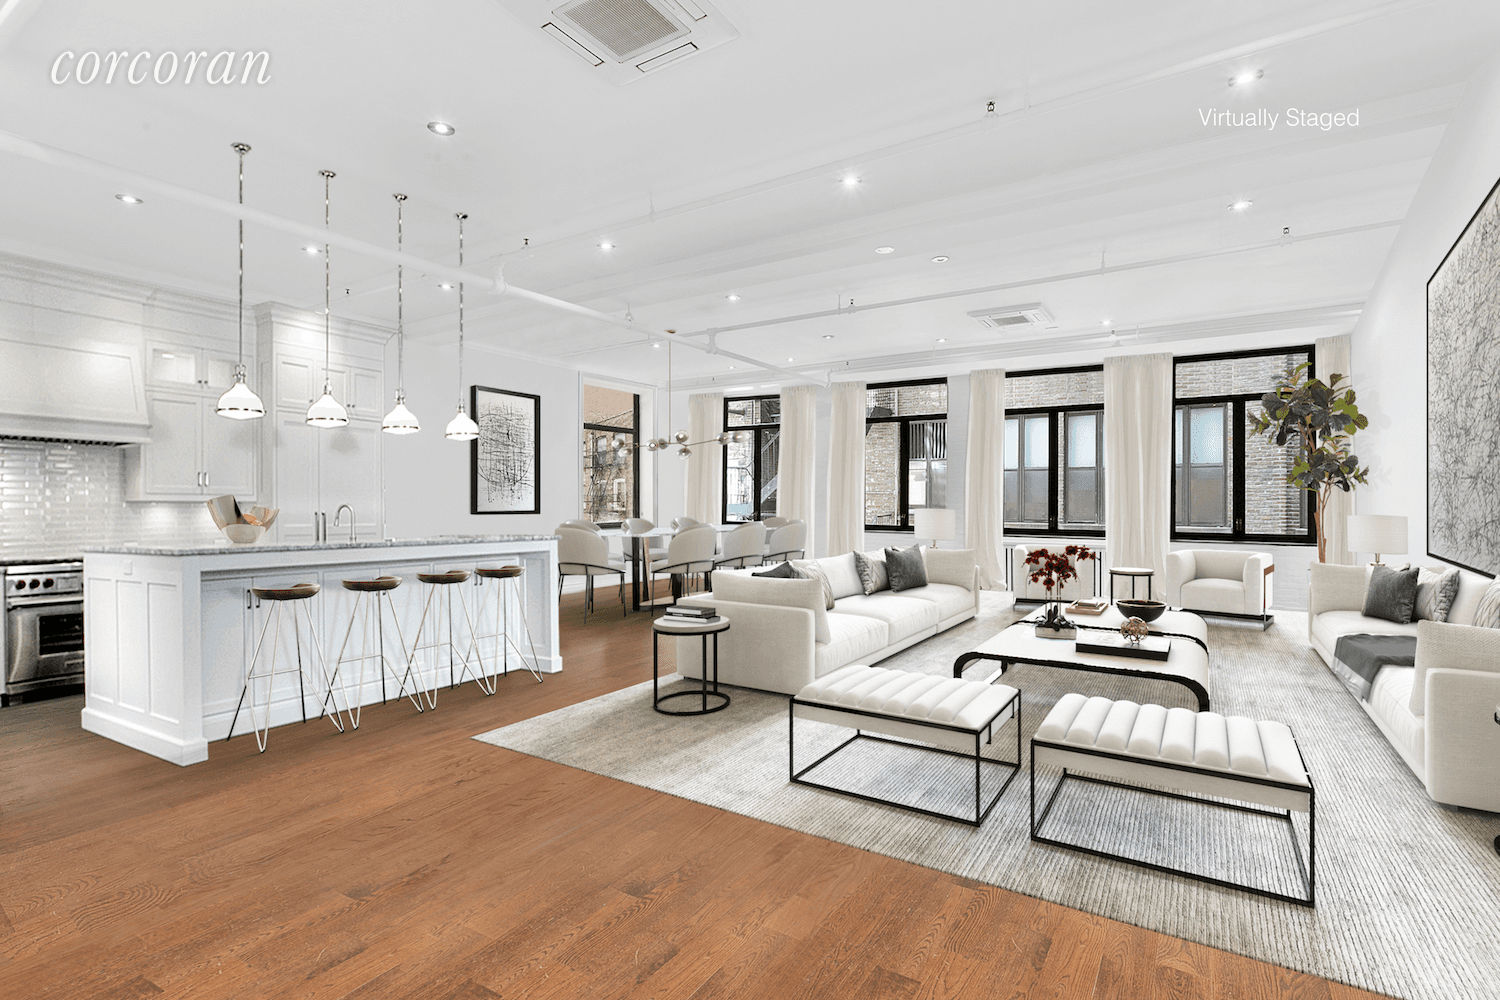 This massive 3, 182 square foot condo loft is ideally located at the cross roads of Hudson Yards, Chelsea, Flatiron and Midtown.